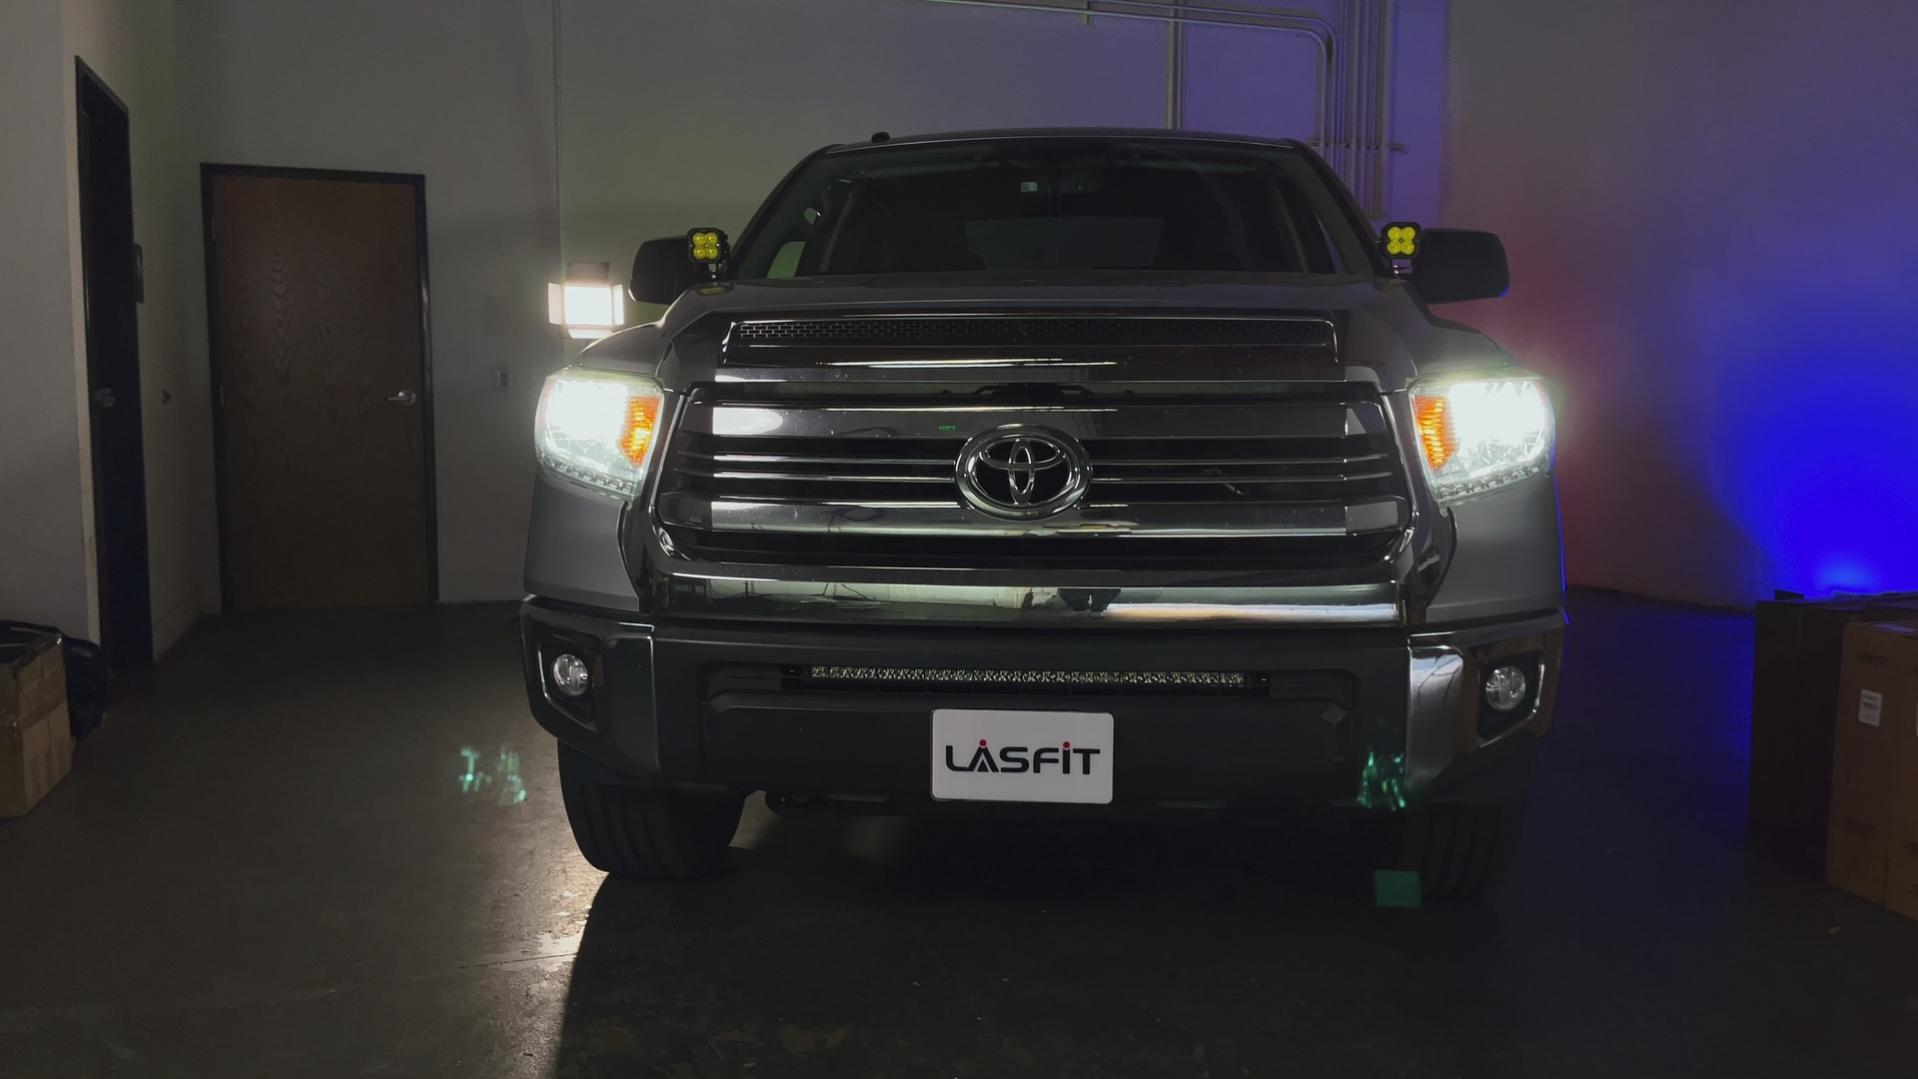 Looking for owners of 2014-2021 Tundra - Lasfit Pro H4 LED bulbs testing invitation-tundra-1_1-2-7-jpg